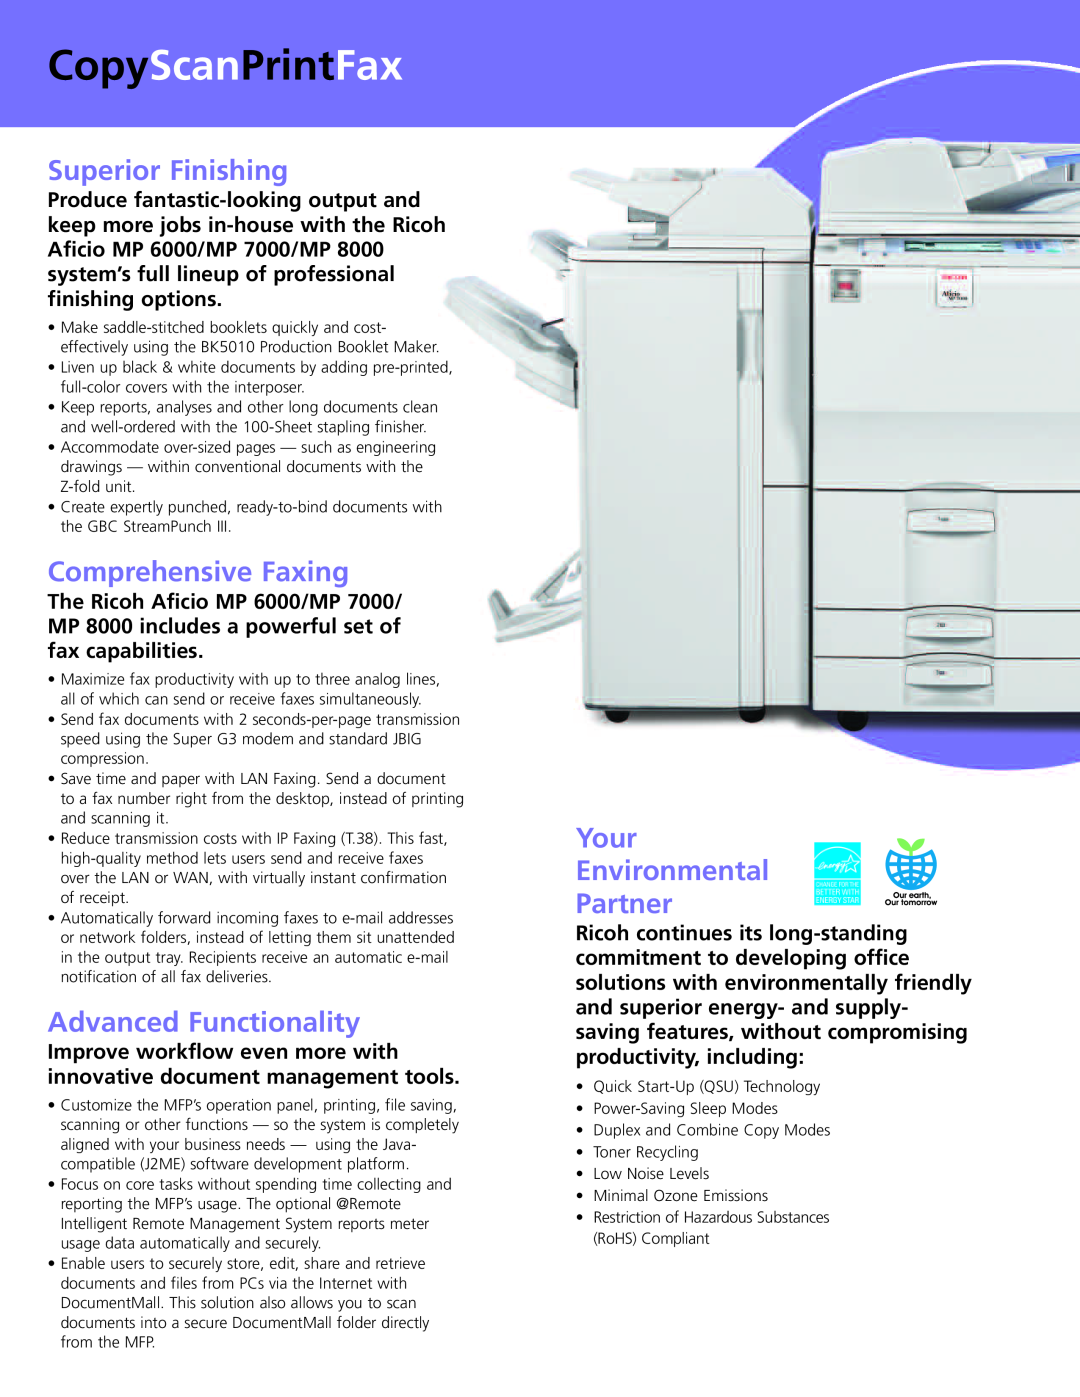 Ricoh MP 8000, MP 7000 manual Superior Finishing, Comprehensive Faxing, Advanced Functionality, Your Environmental Partner 